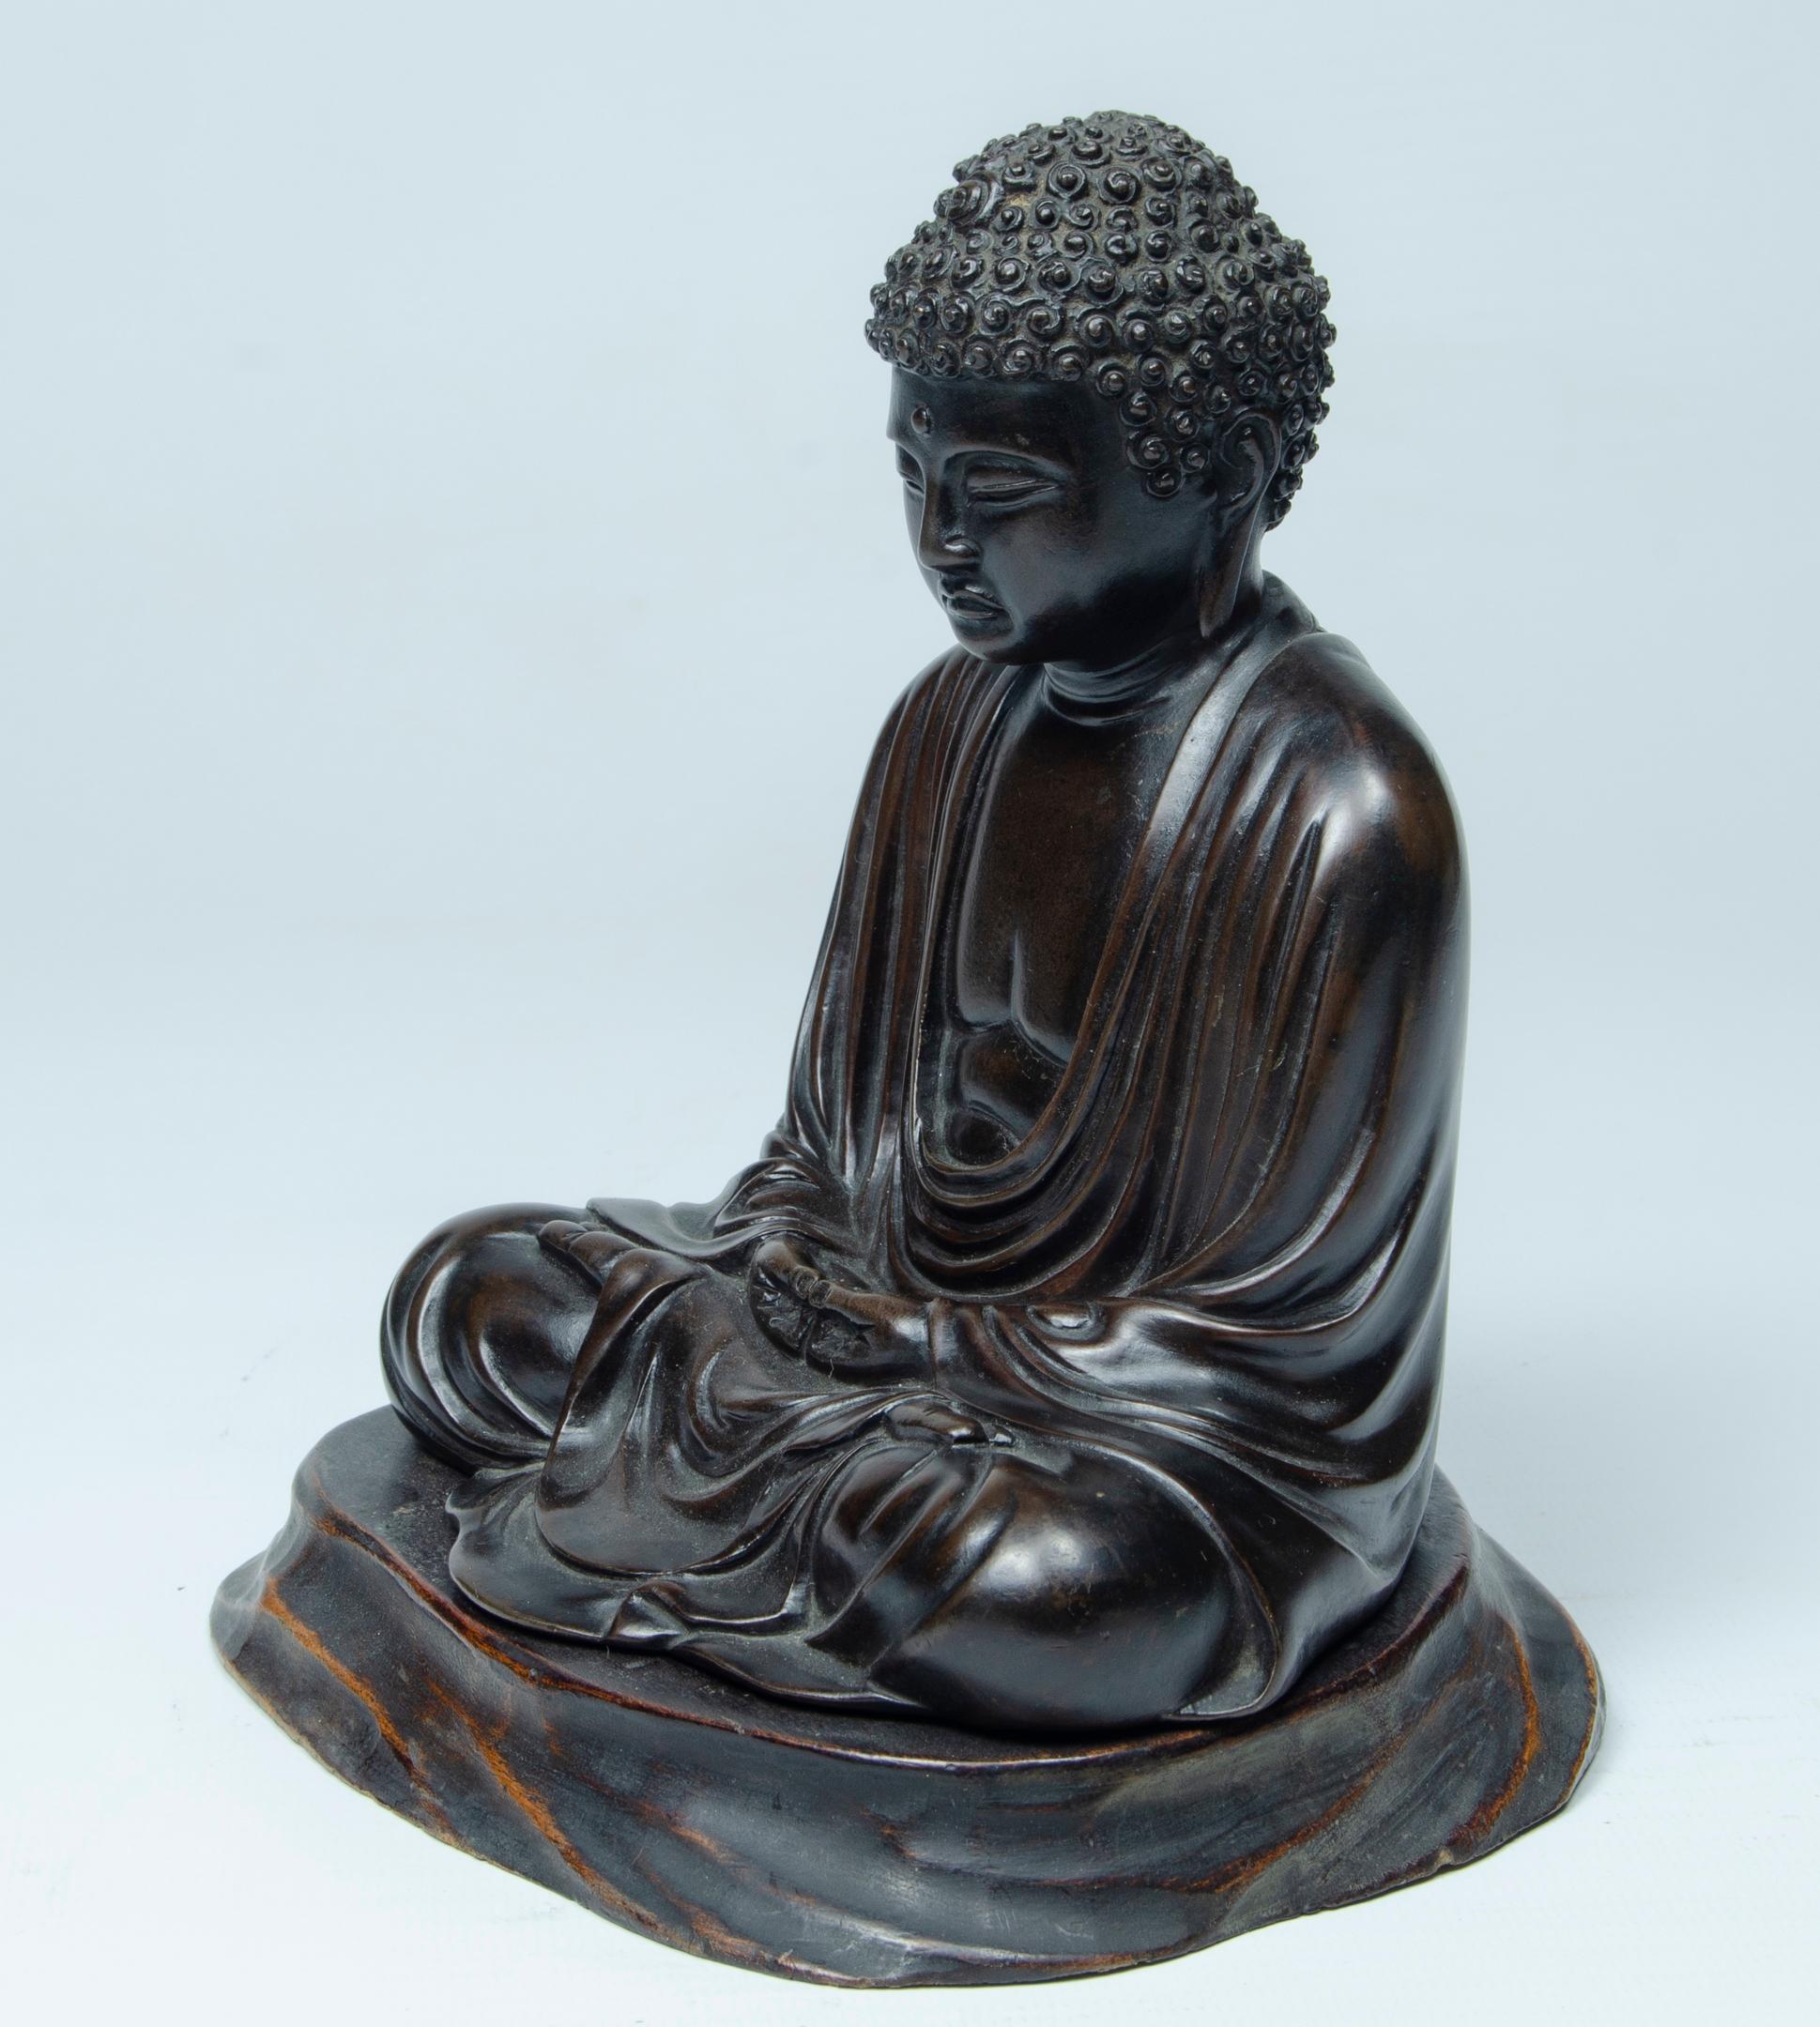 Bronze Japanese Buddha
patinated bronze material
wood base
sealed in bronze (at the base)
Japanese origin perfect condition
some natural wear,
early 20th century.